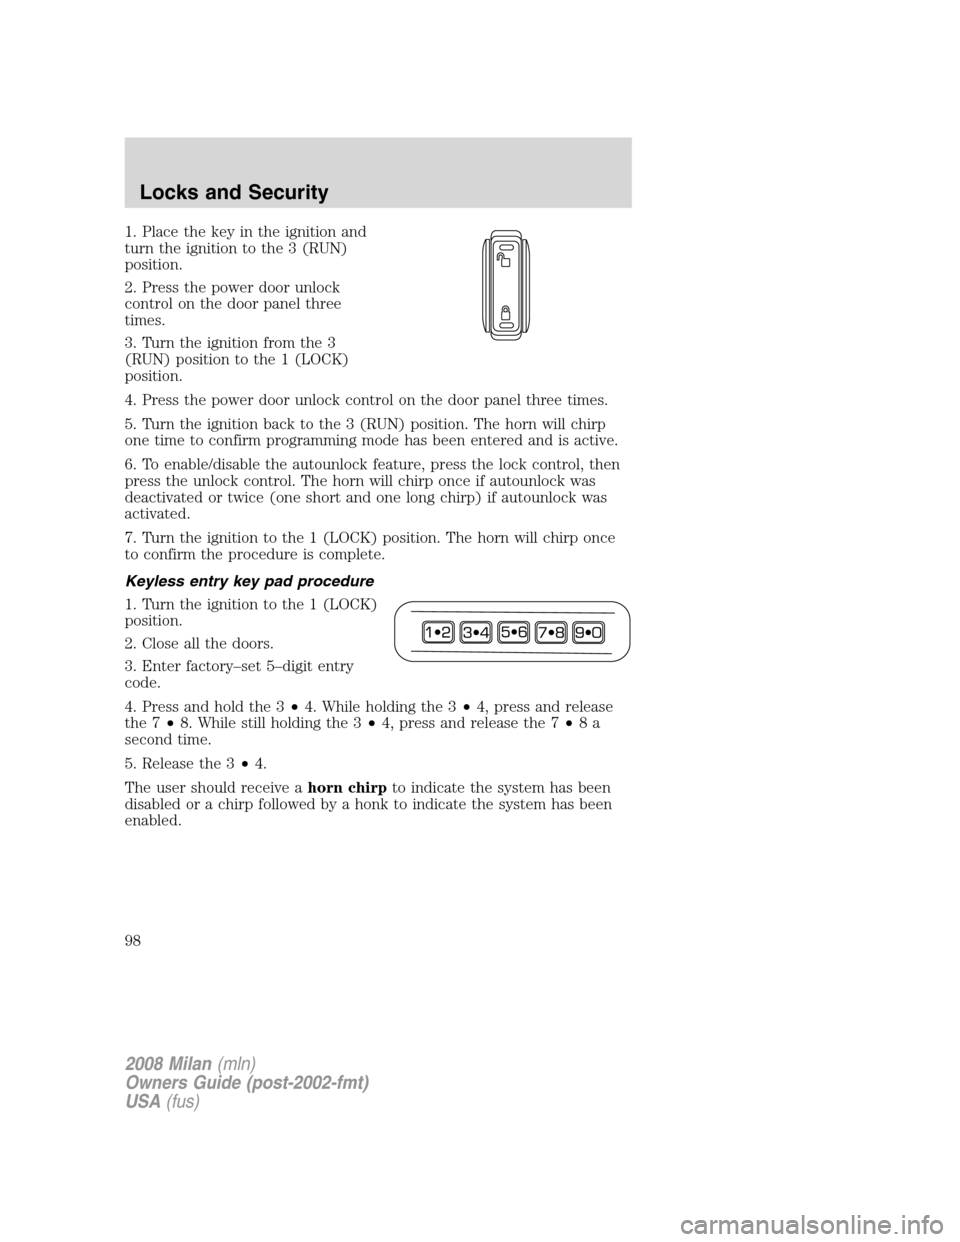 Mercury Milan 2008  Owners Manuals 1. Place the key in the ignition and
turn the ignition to the 3 (RUN)
position.
2. Press the power door unlock
control on the door panel three
times.
3. Turn the ignition from the 3
(RUN) position to 